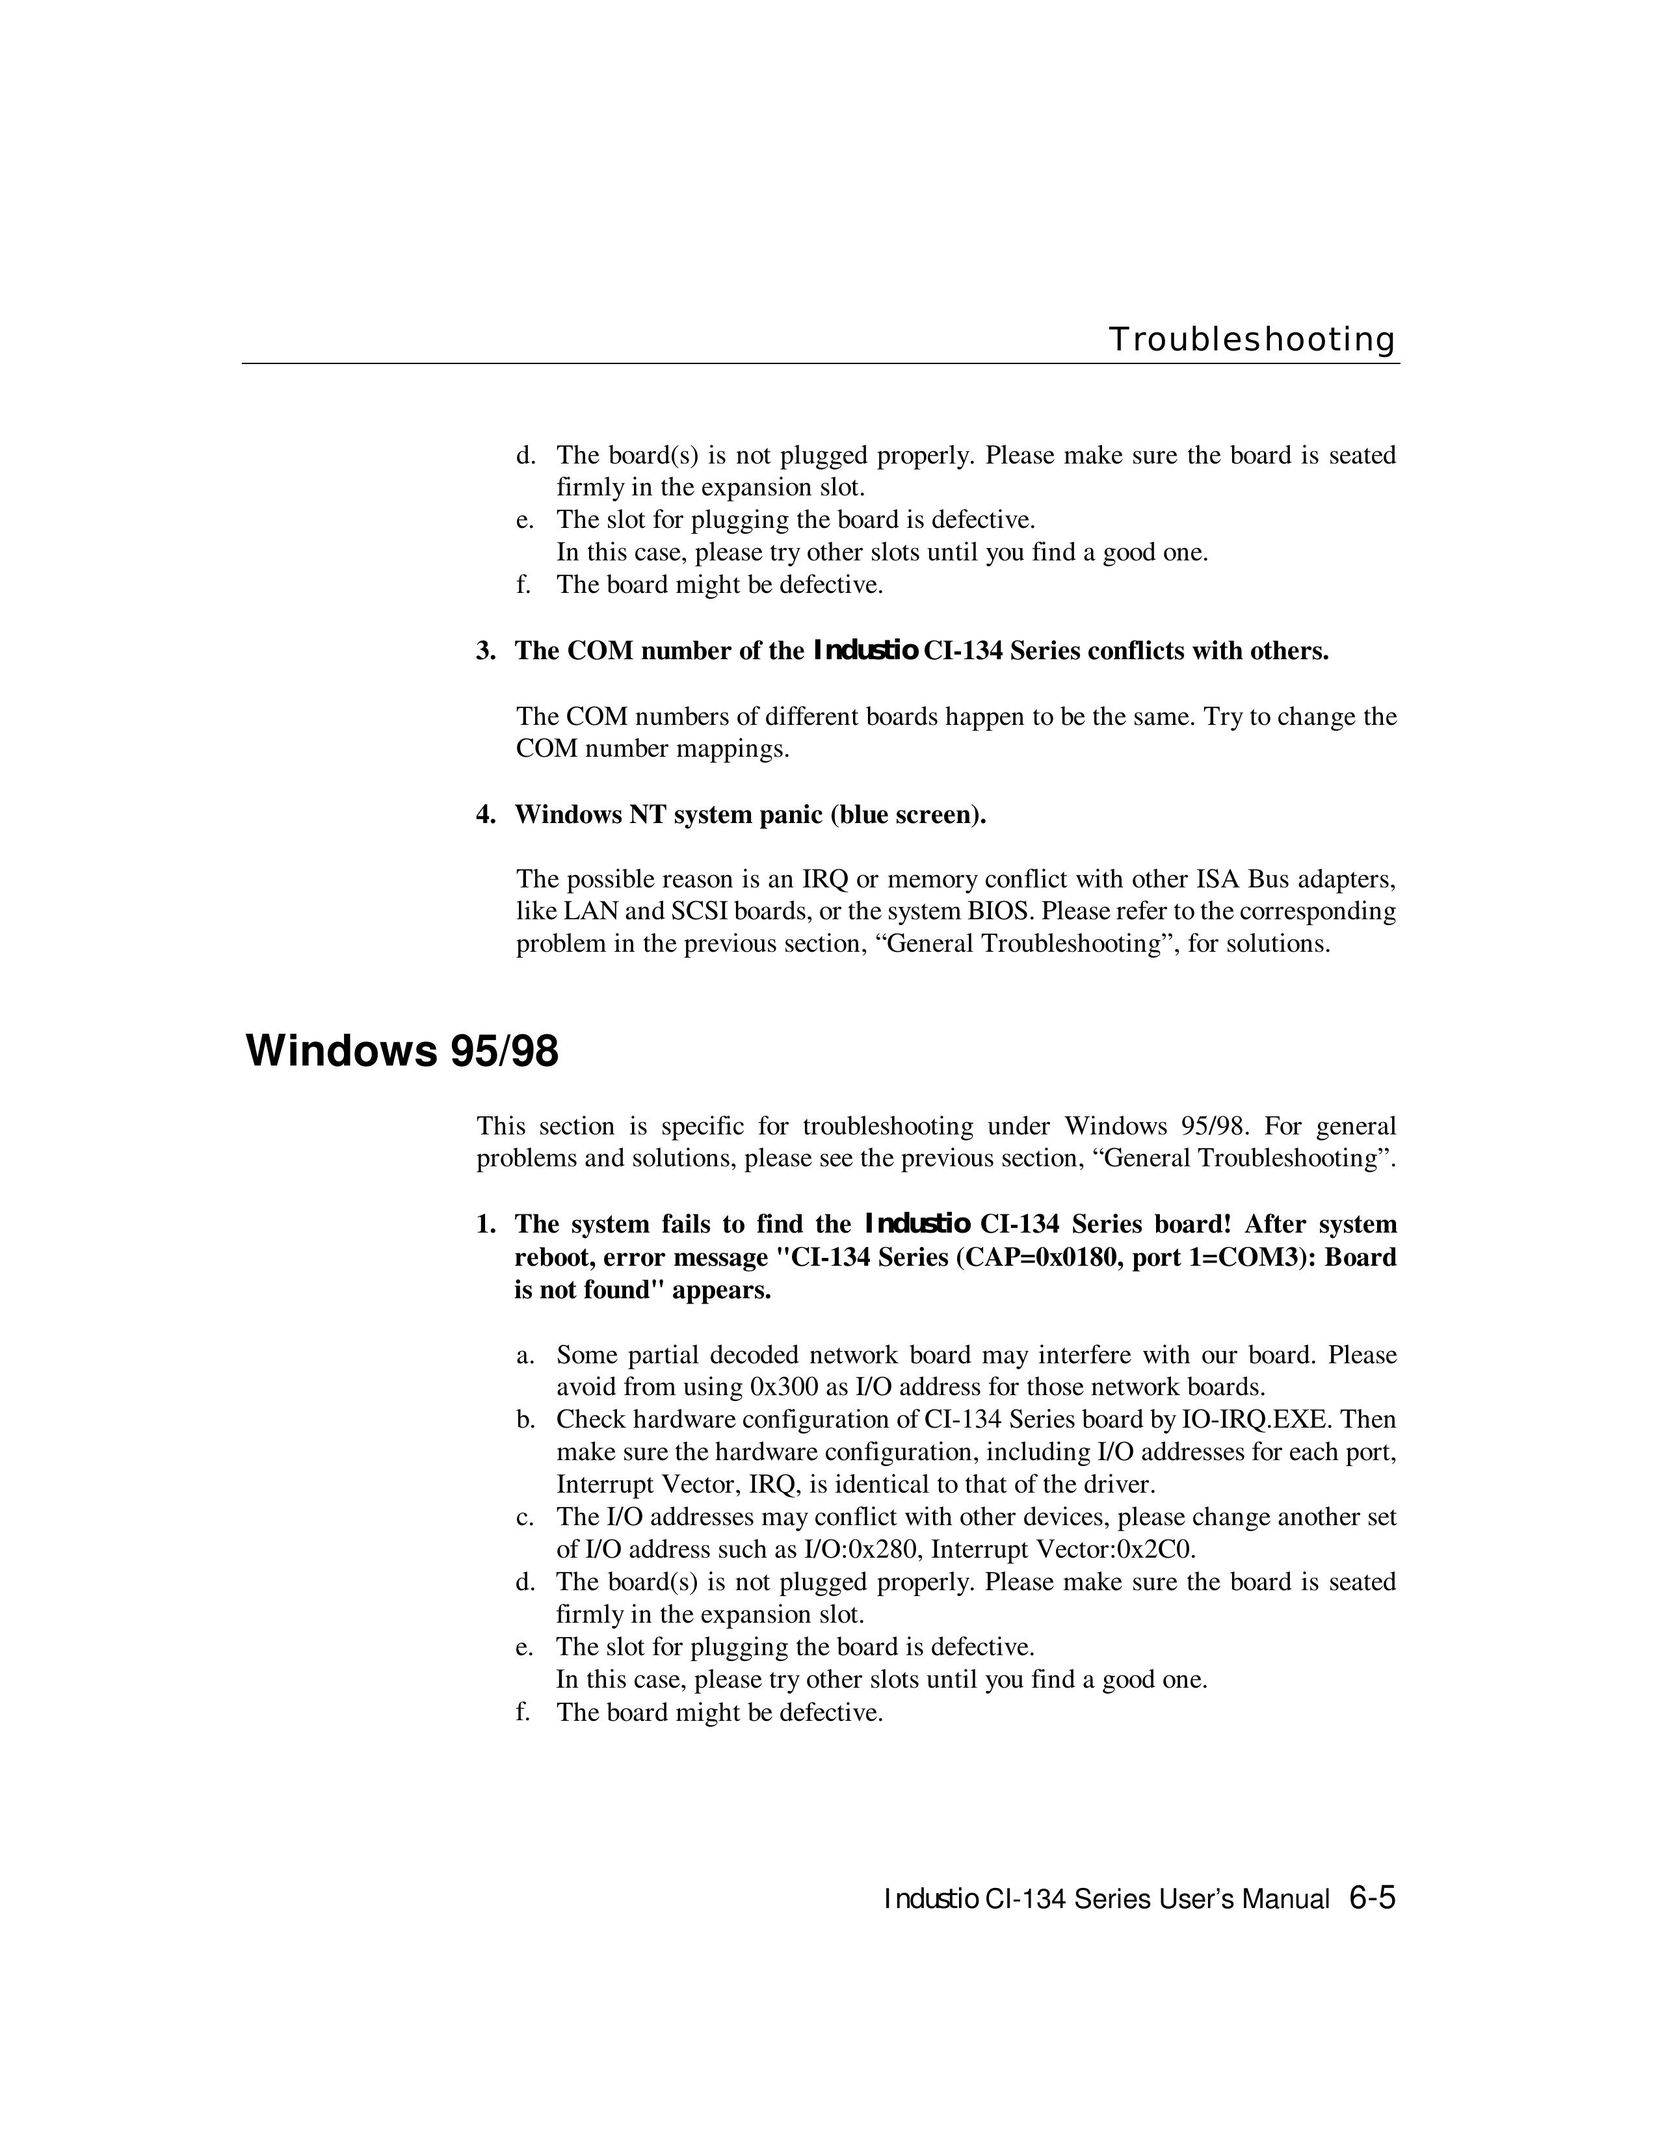 Moxa Technologies RS-485 Musical Toy Instrument User Manual (Page 73)